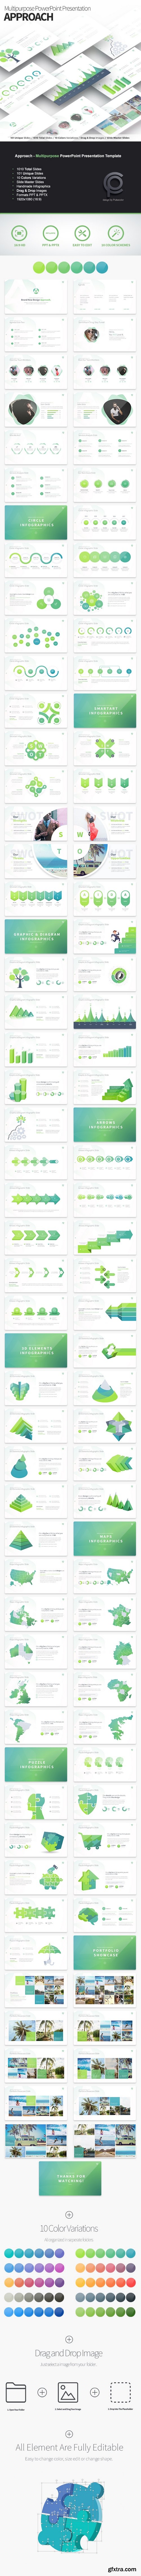 Graphicriver - Approach - Multipurpose PowerPoint Presentation Template 20415265